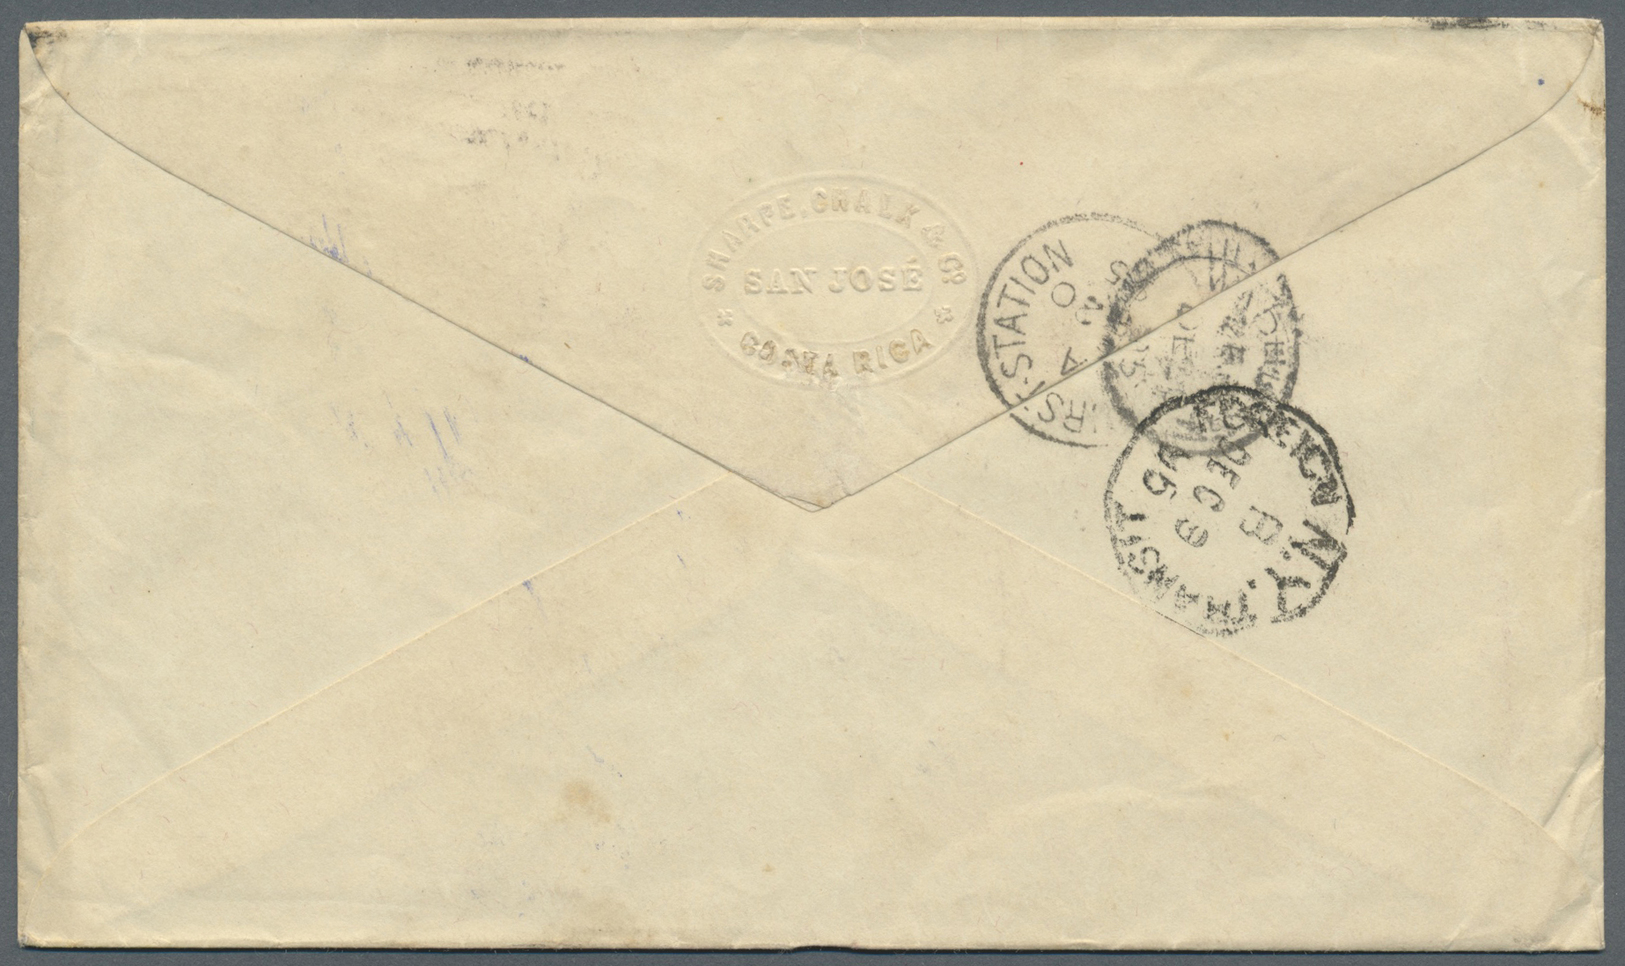 GA Costa Rica: 1895. Postal Stationery Envelope 10c Brown Upgraded With Yvert 34, 10c Green Tied By Cork Cancel With Adj - Costa Rica